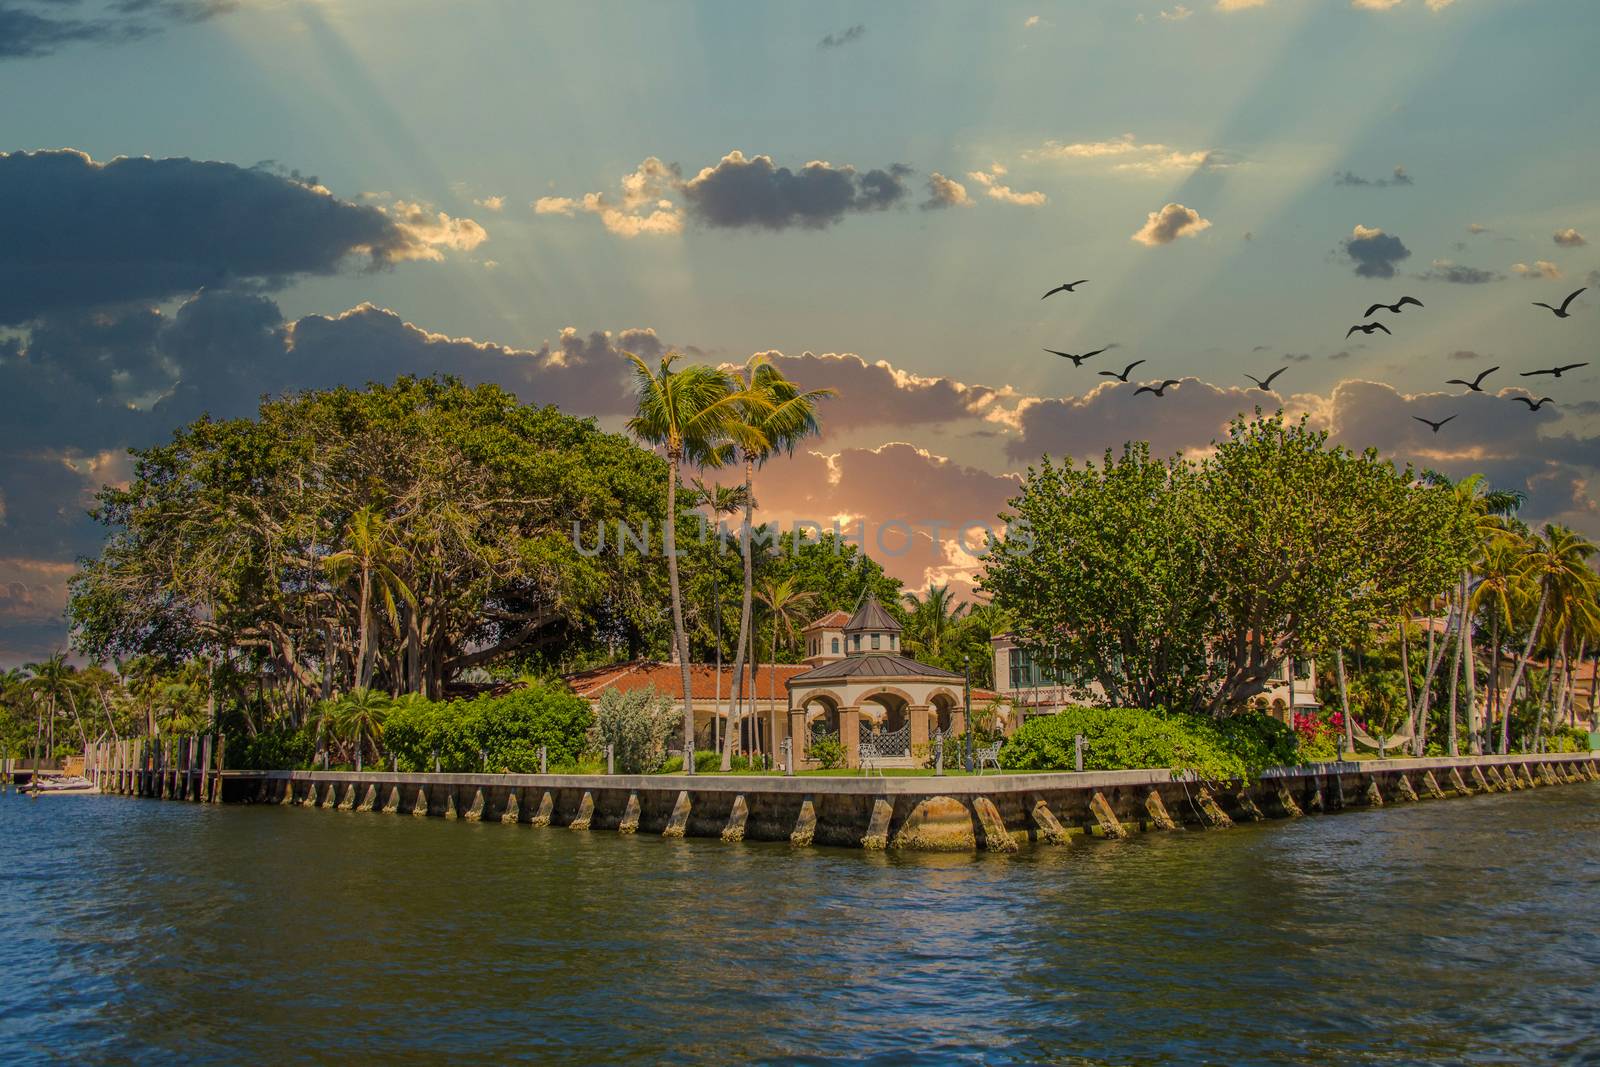 A Large House on the Intracoastal Waterway in Fort Lauderdale at Sunset